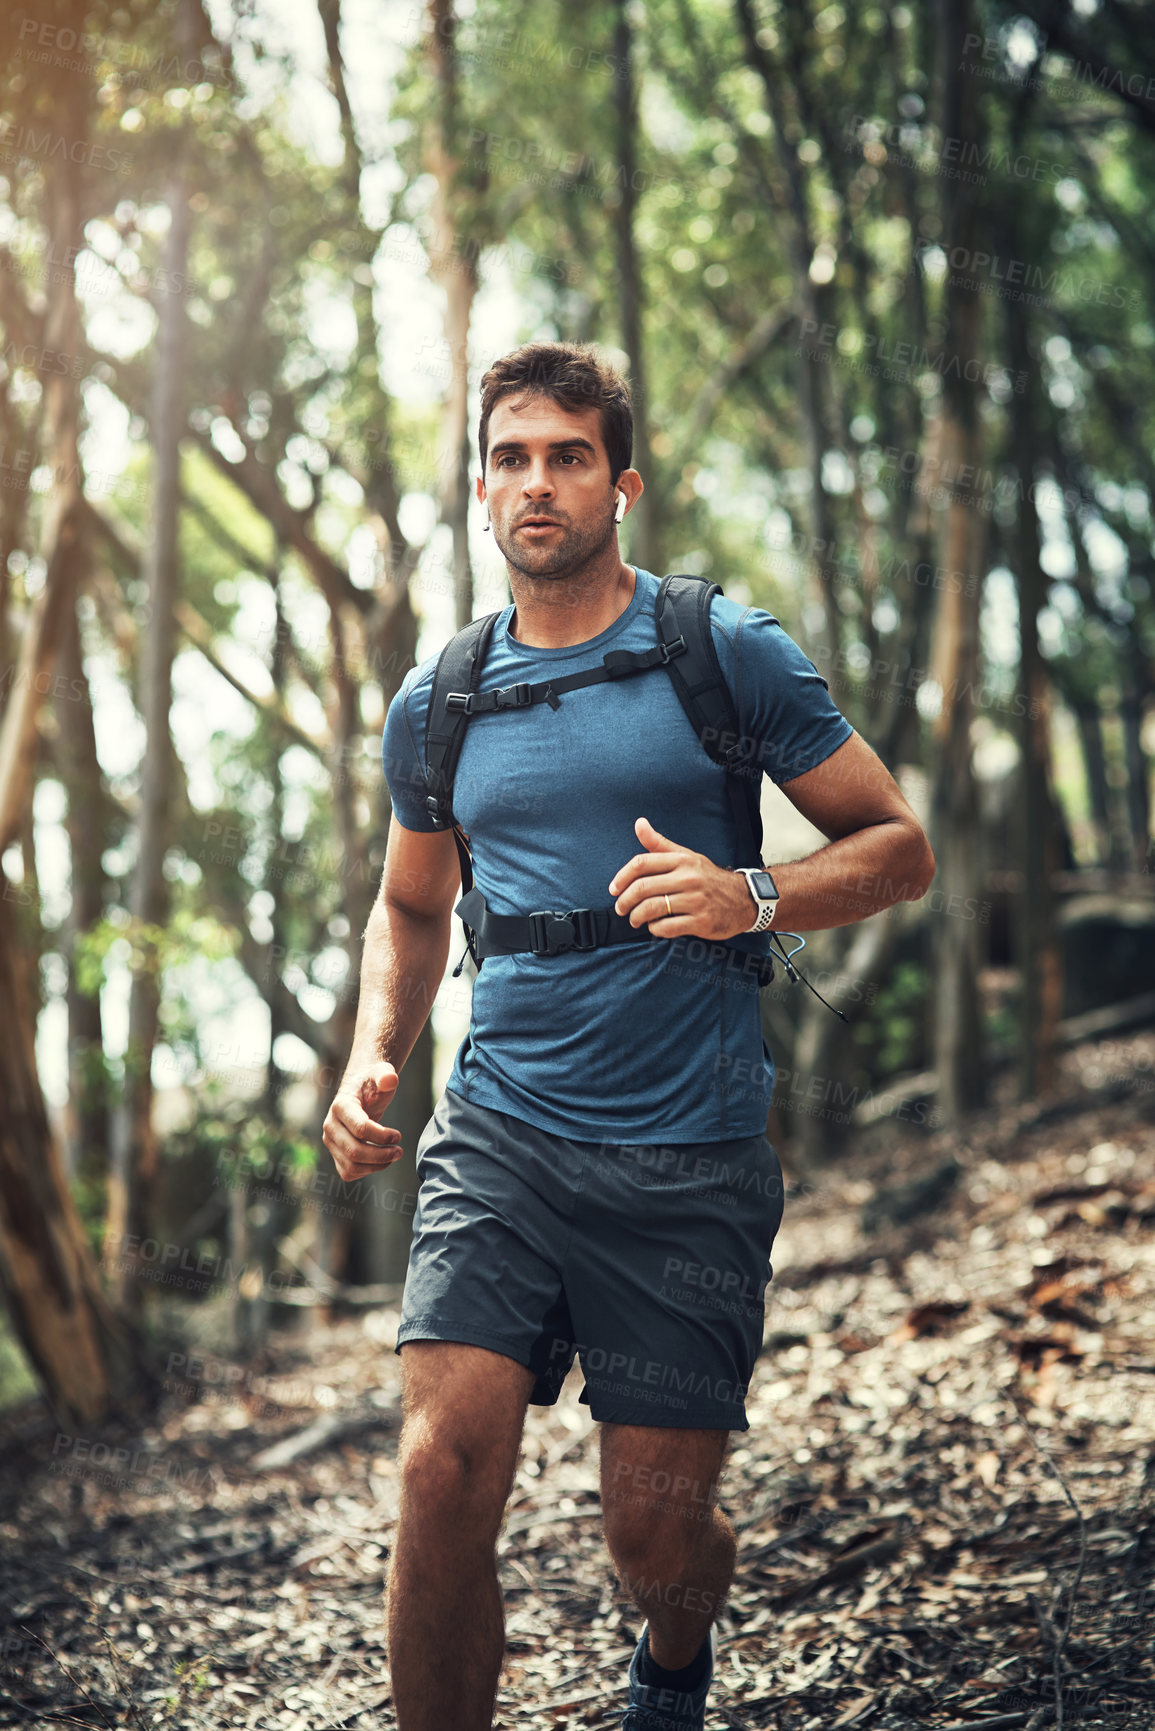 Buy stock photo Cropped shot of a handsome young man running during his hike in the mountains